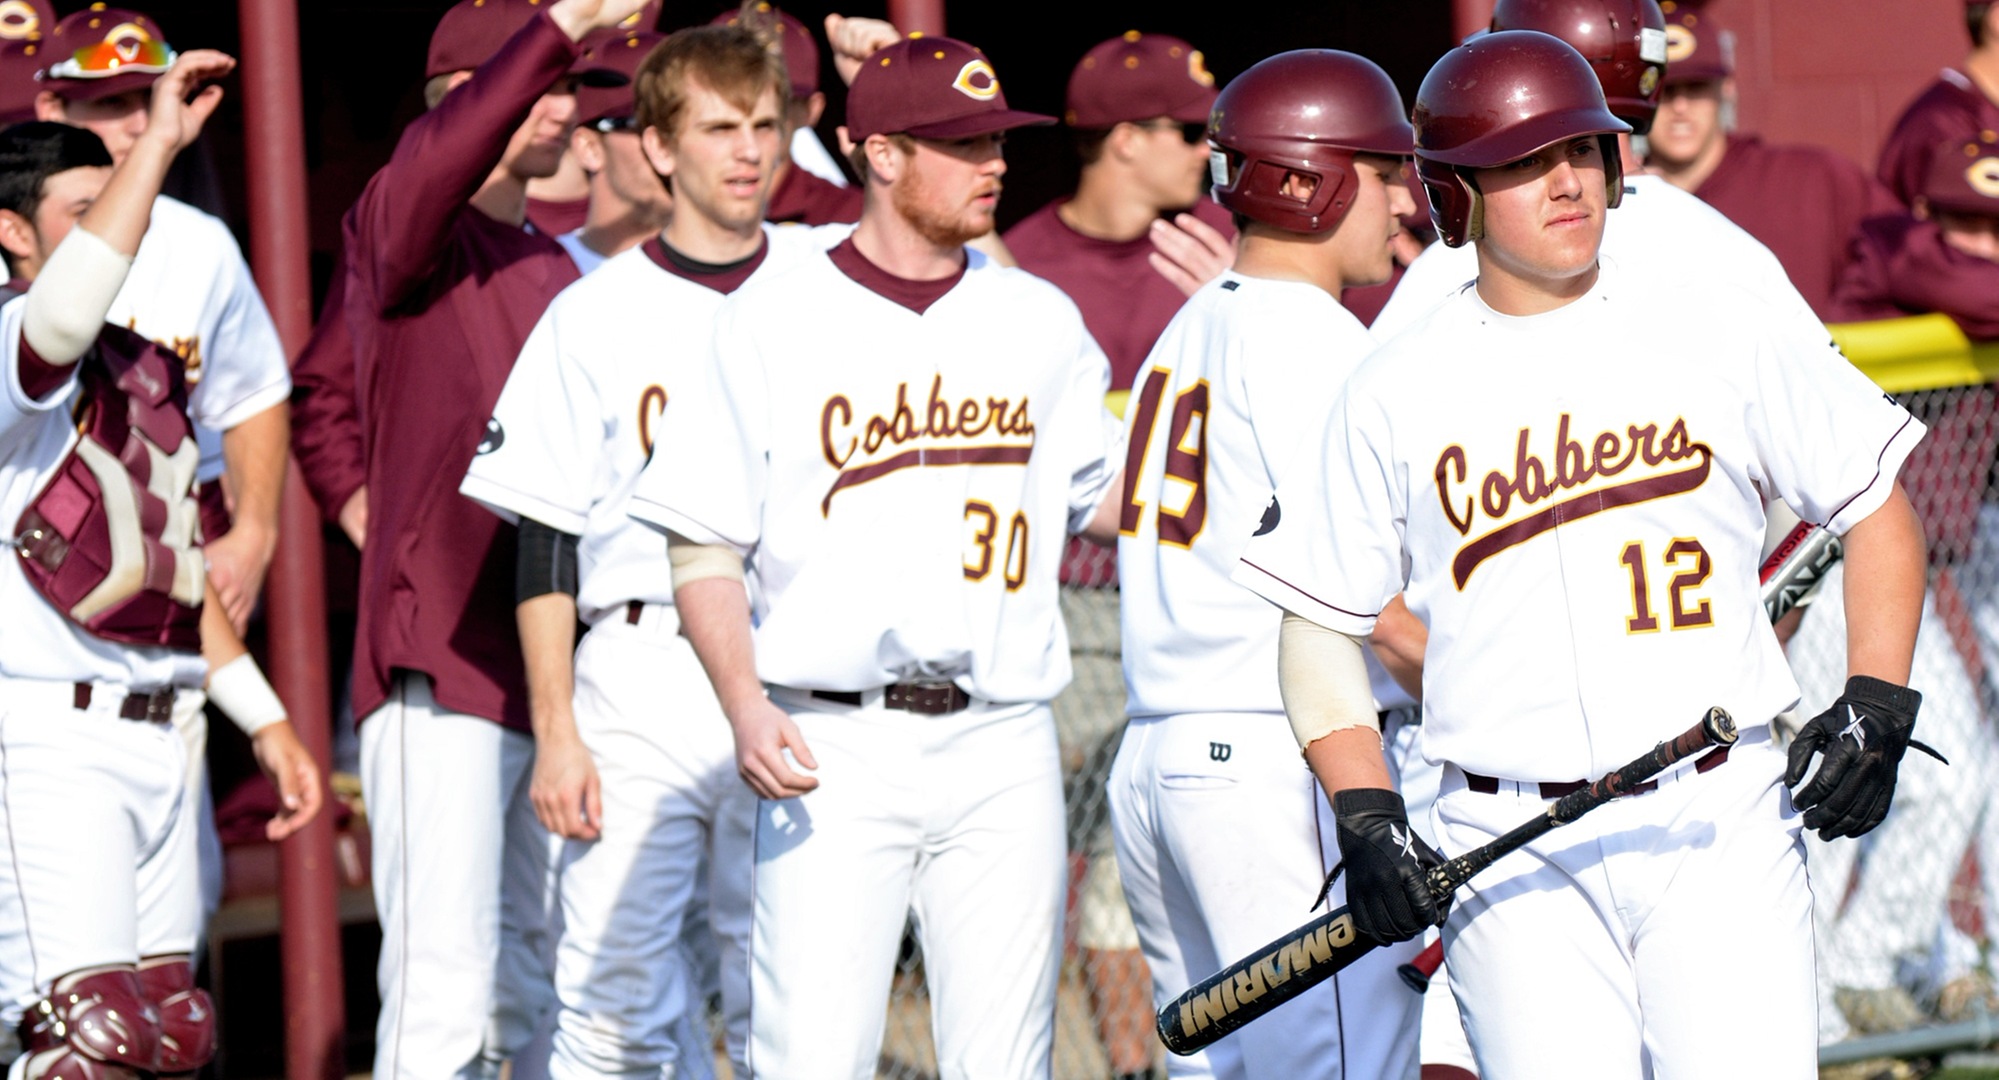 Nate Leintz (#12) had one of the Cobbers' five extra base hits in the team's 8-7 non-conference win at Minn.-Morris.